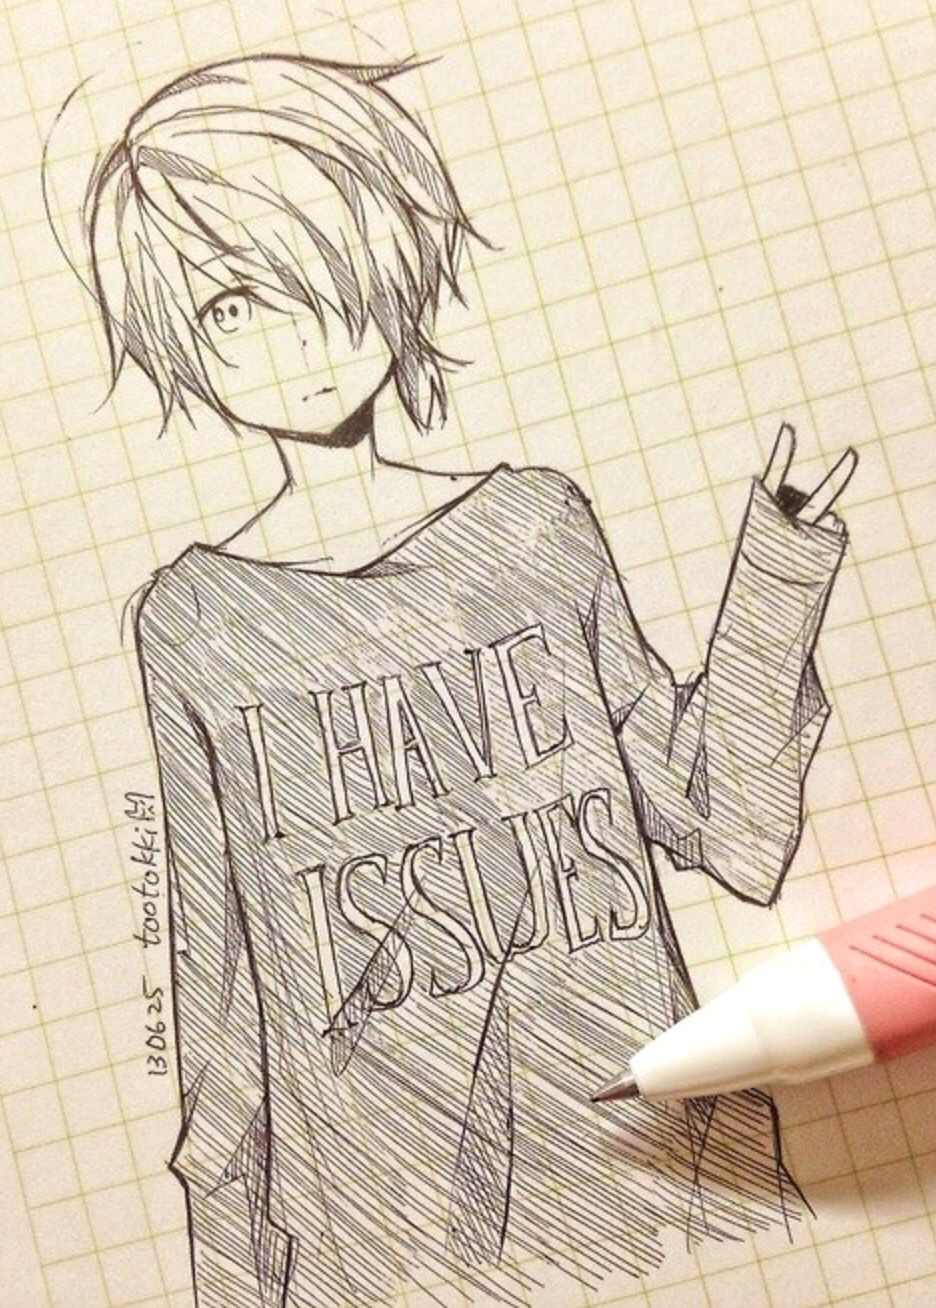 Hoodie Male Anime Drawings Cute Anime Drawing tootokki I Have issues Sweater Anime